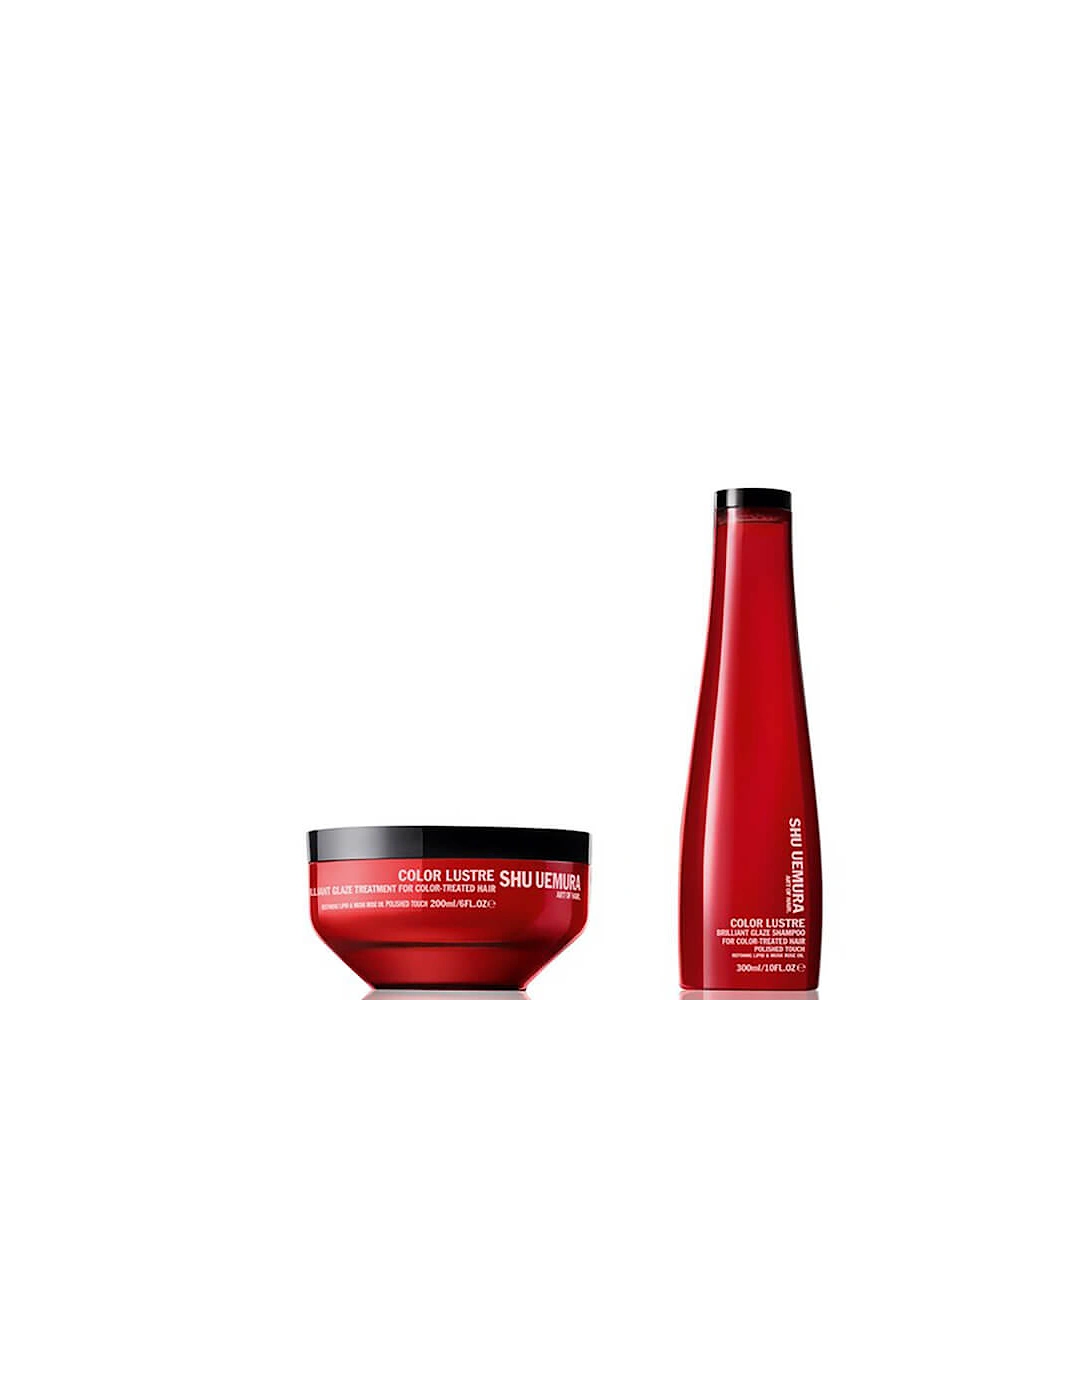 Art of Hair Color Lustre Sulfate Free Shampoo (300ml) and Color Lustre Masque (200ml) - Art of Hair - Art of Hair Color Lustre Sulfate Free Shampoo (300ml) and Color Lustre Masque (200ml) - ann, 2 of 1